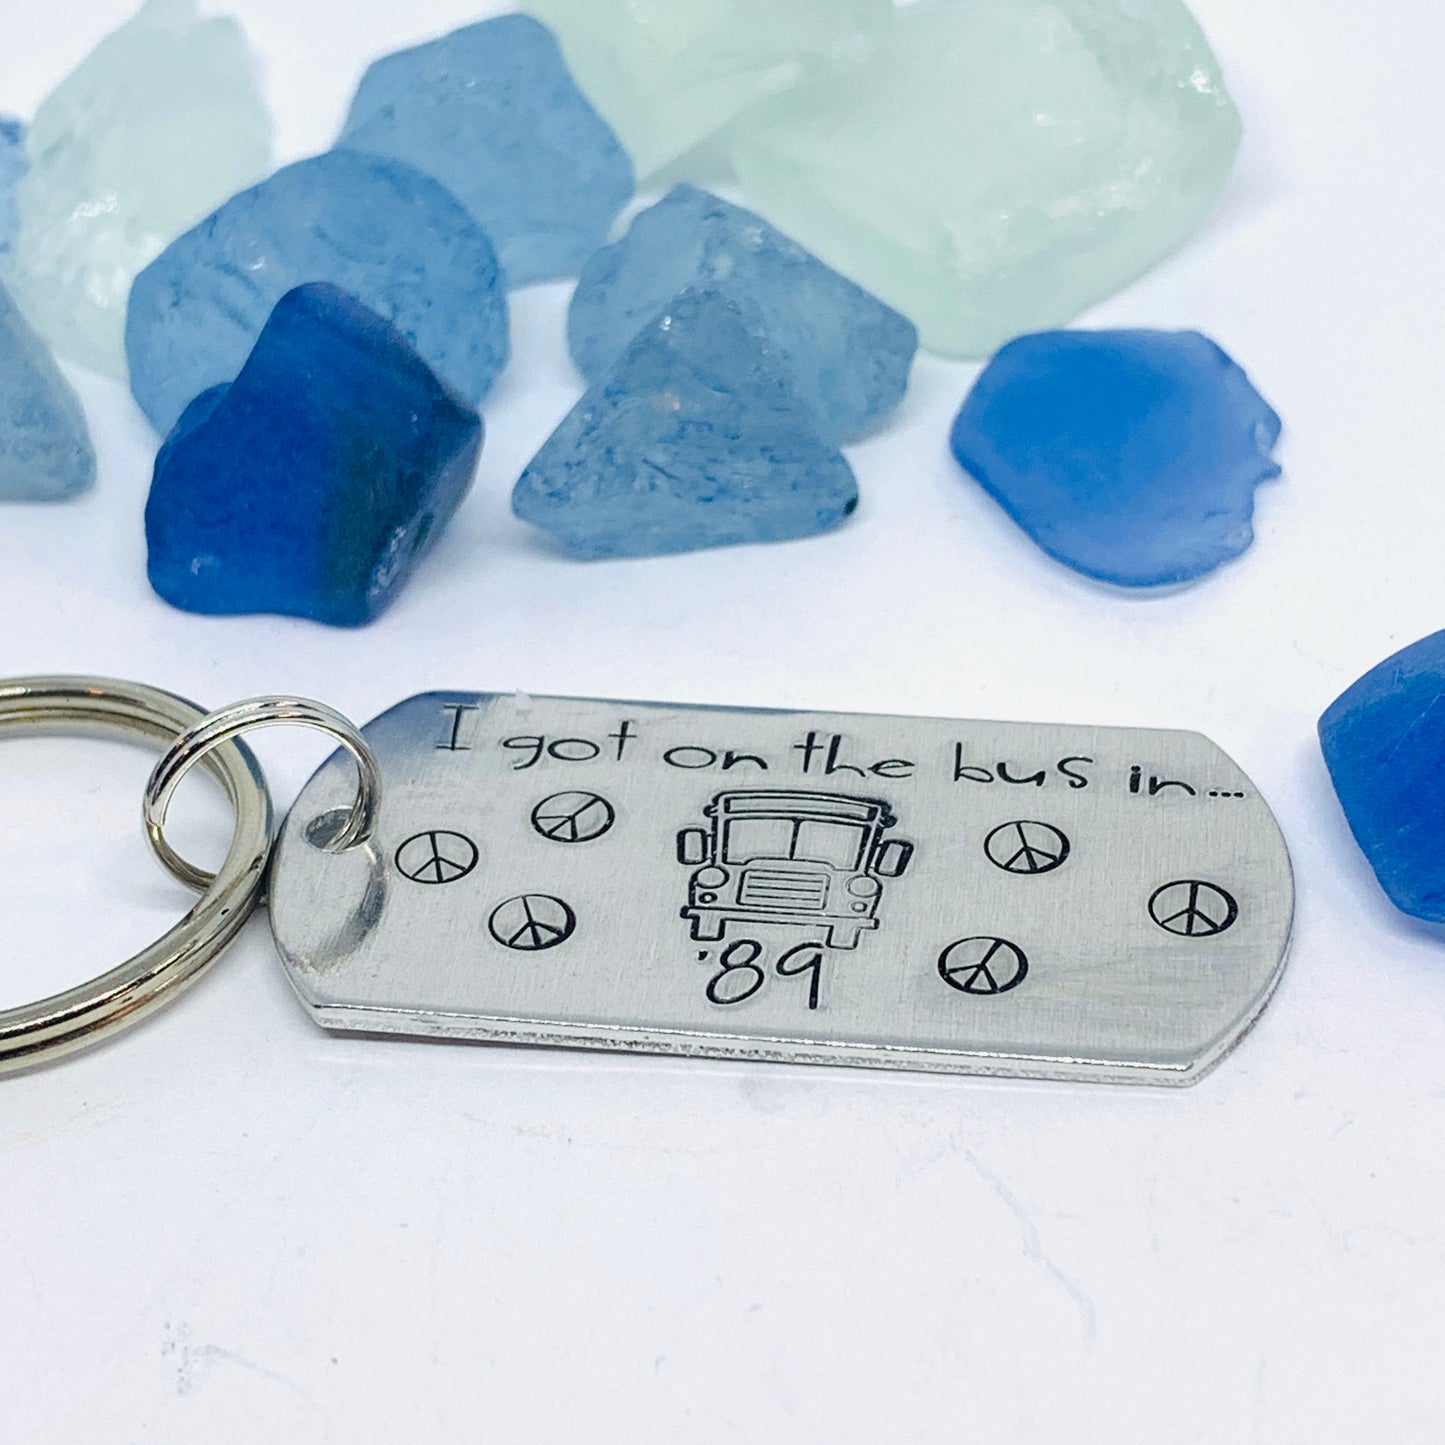 I got on the bus in … (year) Keyring | Hand Stamped Metal Keyring | Grateful Dead Themed Gift for Dead Heads | School Bus |  Groupies Gift Idea |